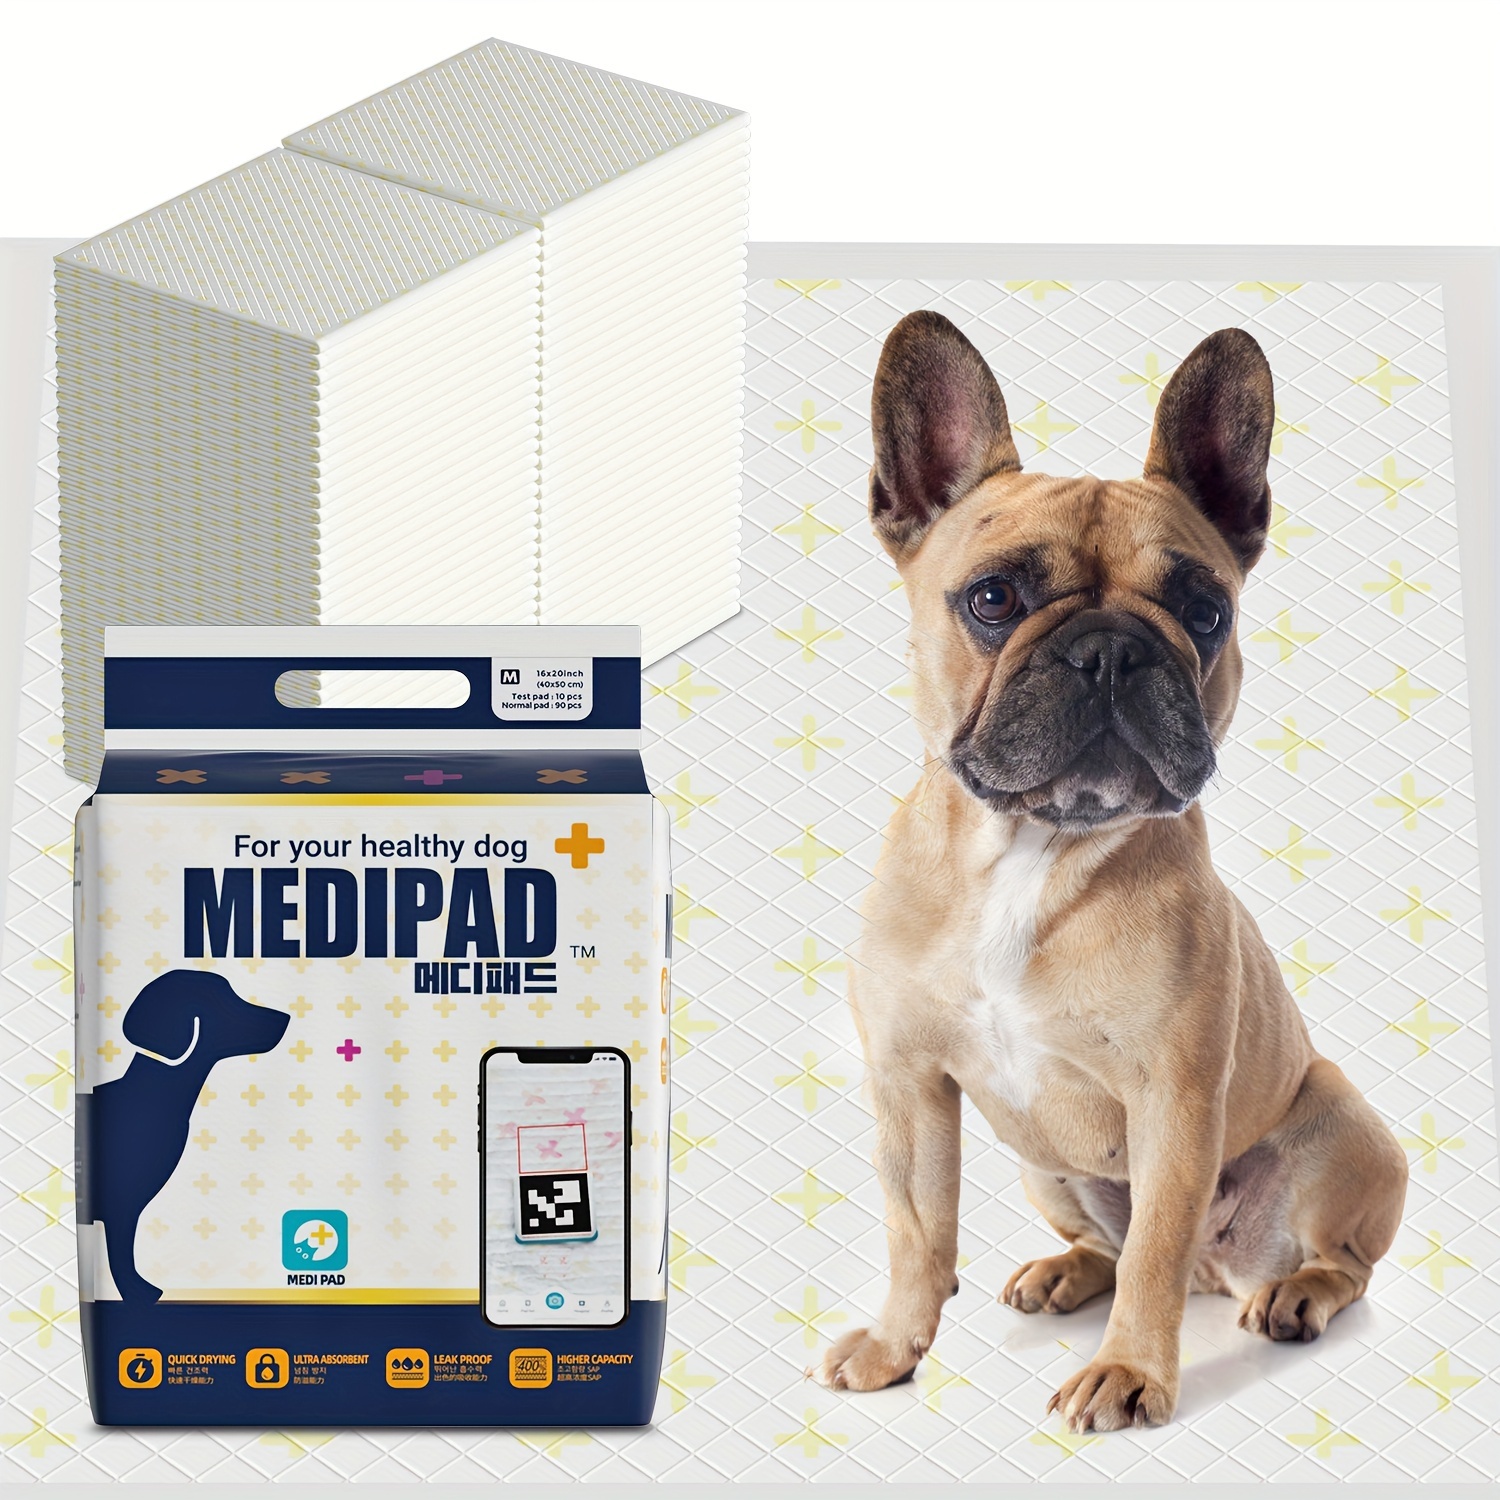 

100pcs - 16" X 20" Puppy Pee Pads, Super Absorbent Pet Pads, Leak-proof Disposable Training Pads, Odor Control, Suitable For Dogs, Cats, Rabbits, Health Monitoring Pee Pads